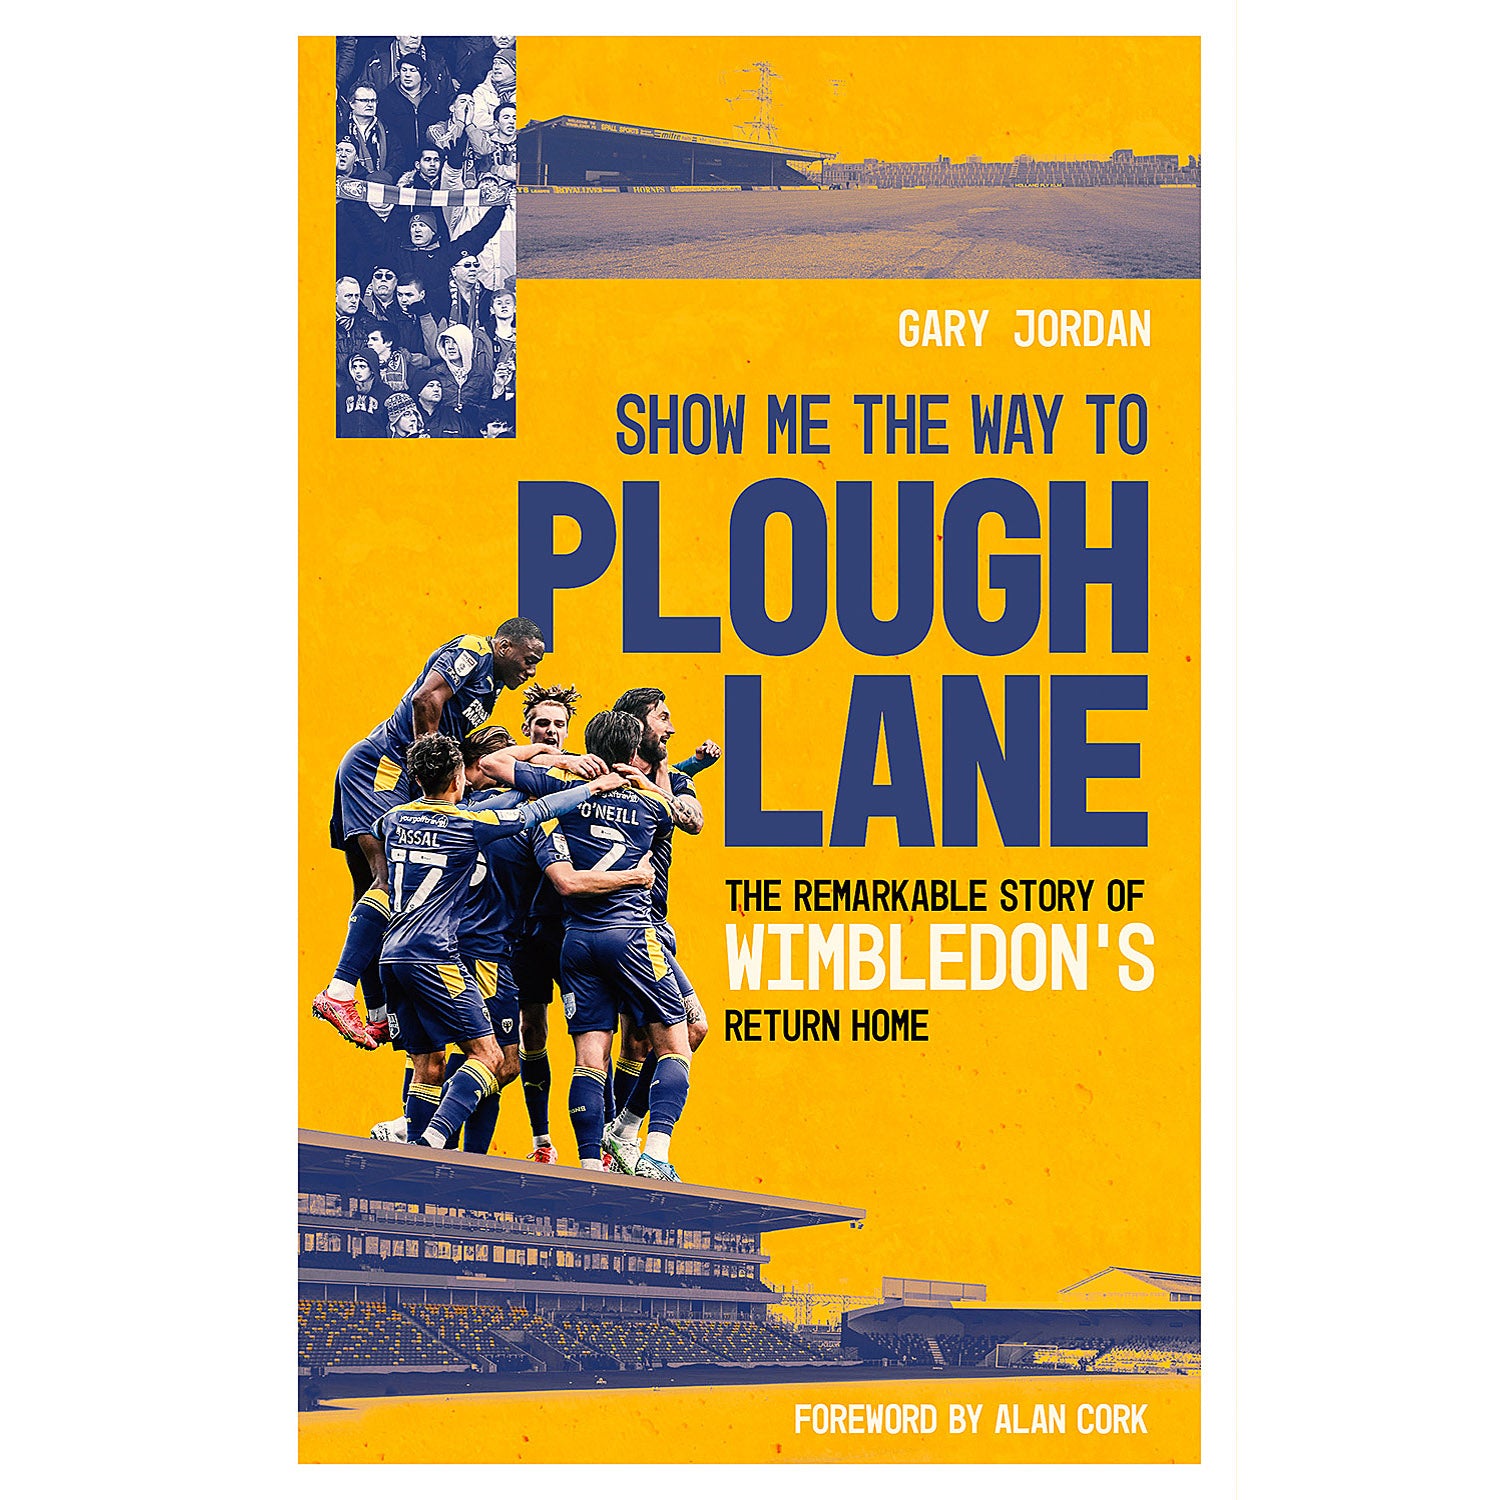 Show Me The Way To Plough Lane – The Remarkable Story of Wimbledon's Return Home